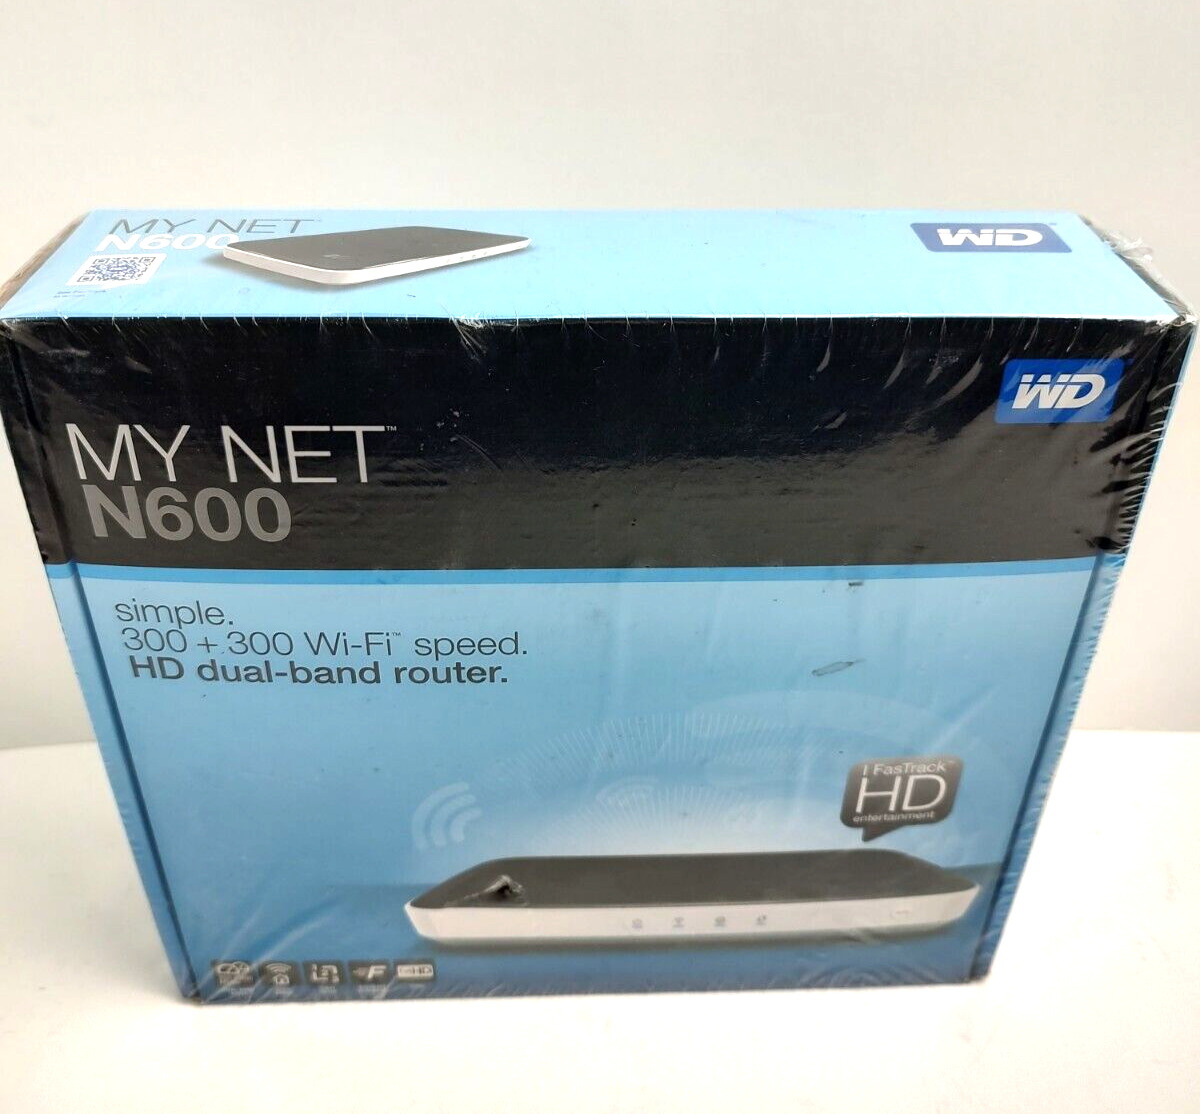 WD My Net N600 HD Dual Band Router Wireless N WiFi Router Accelerate HD - Sealed